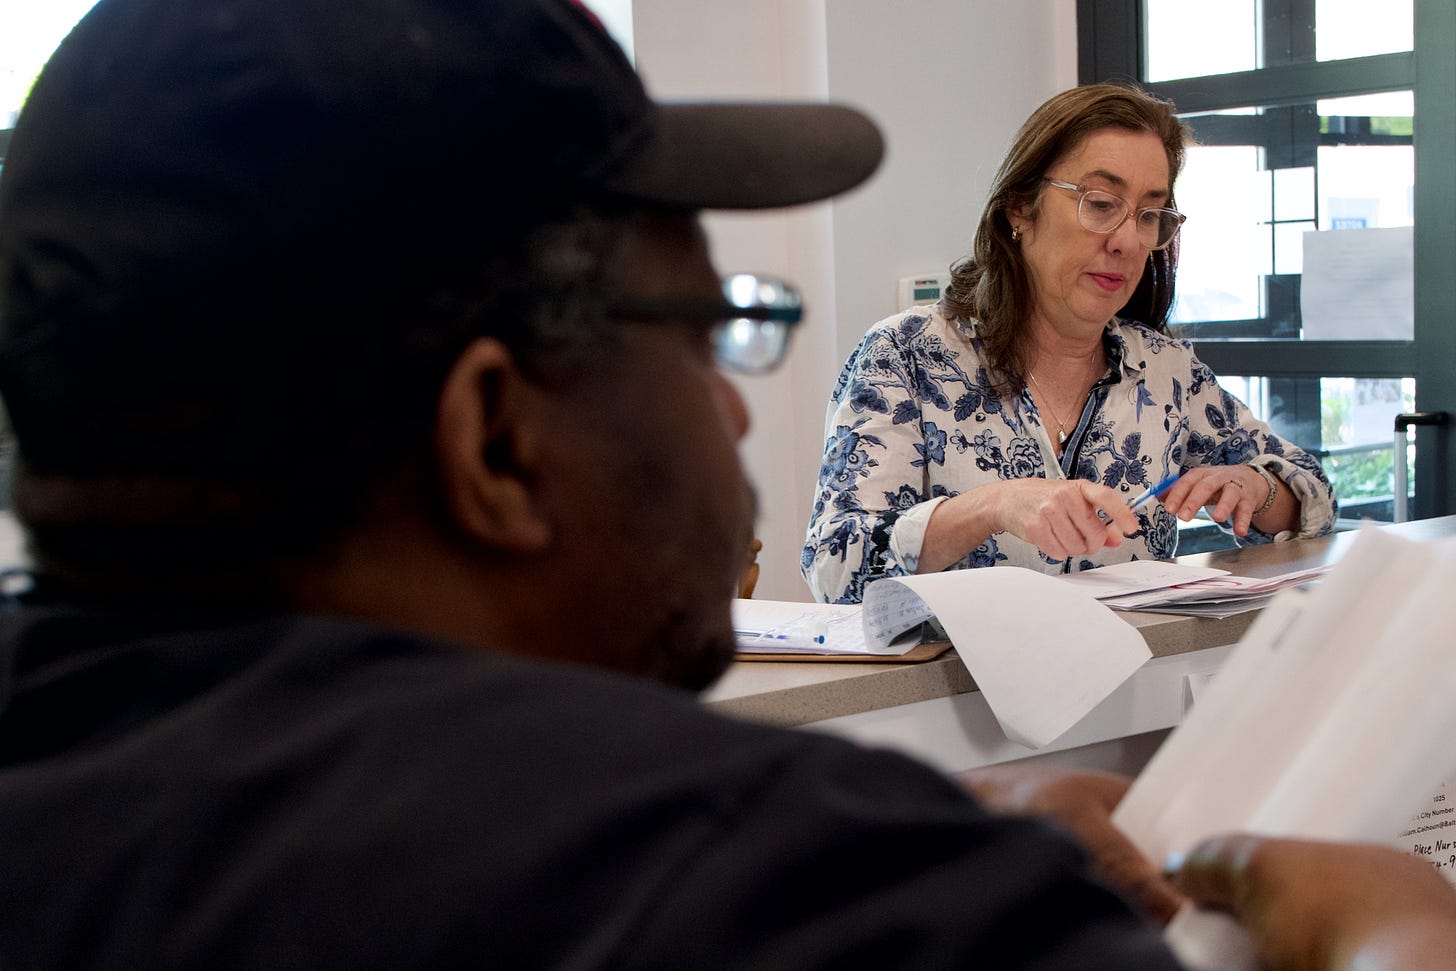 Laurel Peltier, an energy justice advocate who volunteers at the local nonprofit Cares, goes over utility bills to determine if her client Henry Burlock was overcharged by a private energy company. Credit: Aman Azhar/Inside Climate News